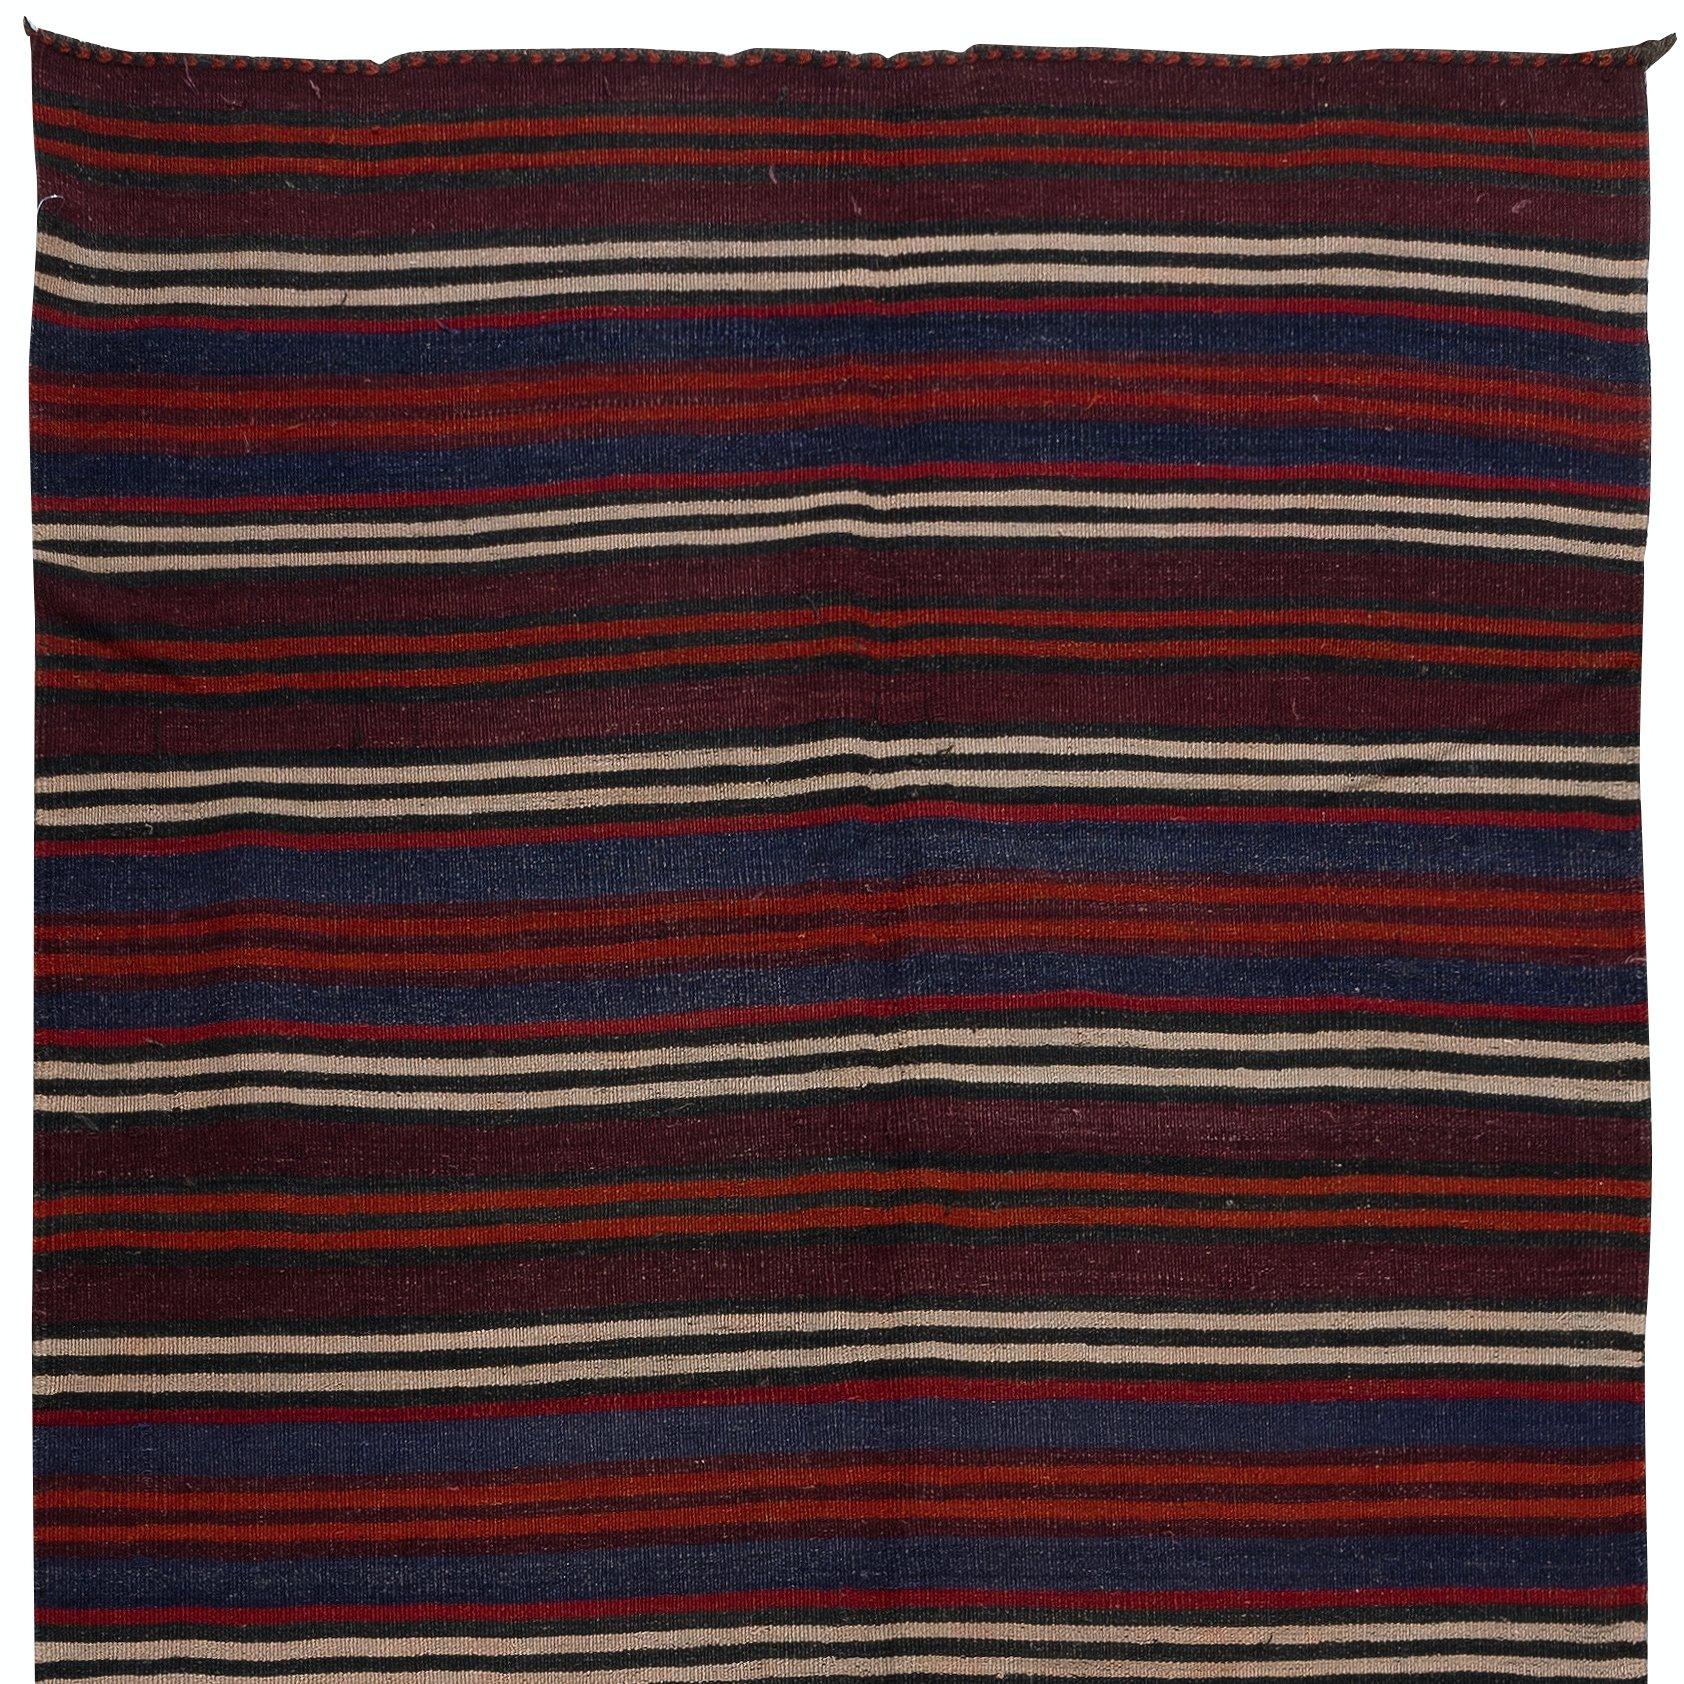 4.2x10.5 Ft Vintage Hand-Woven Turkish Striped Kilim, Flat-Weave Rug, 100% Wool In Good Condition For Sale In Philadelphia, PA